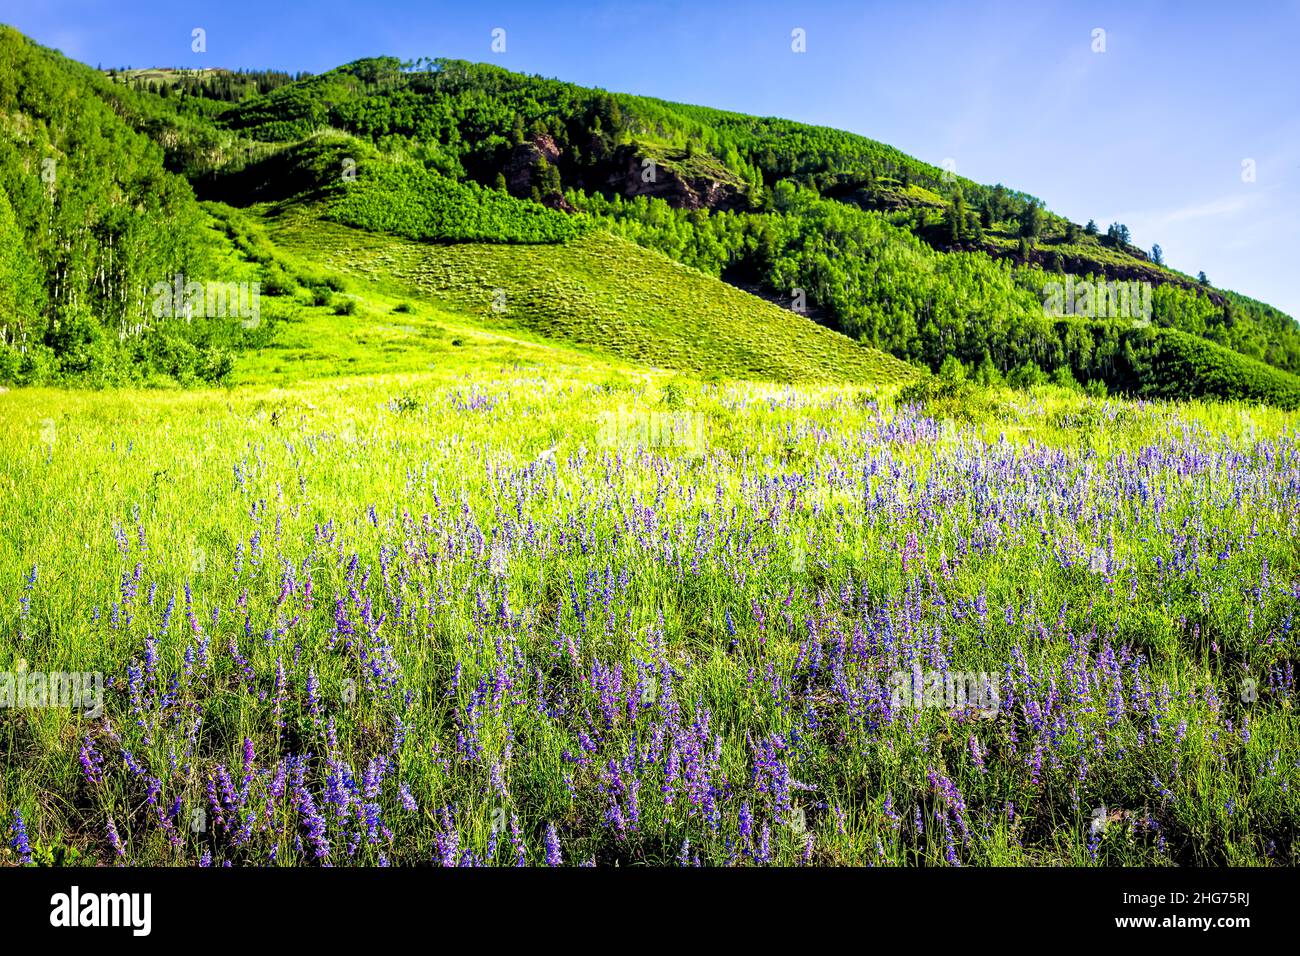 Lush green meadow field of many wild blue purple lupine flowers wildflowers in Maroon Bells area in Aspen, Colorado with background of rocky mountains Stock Photo